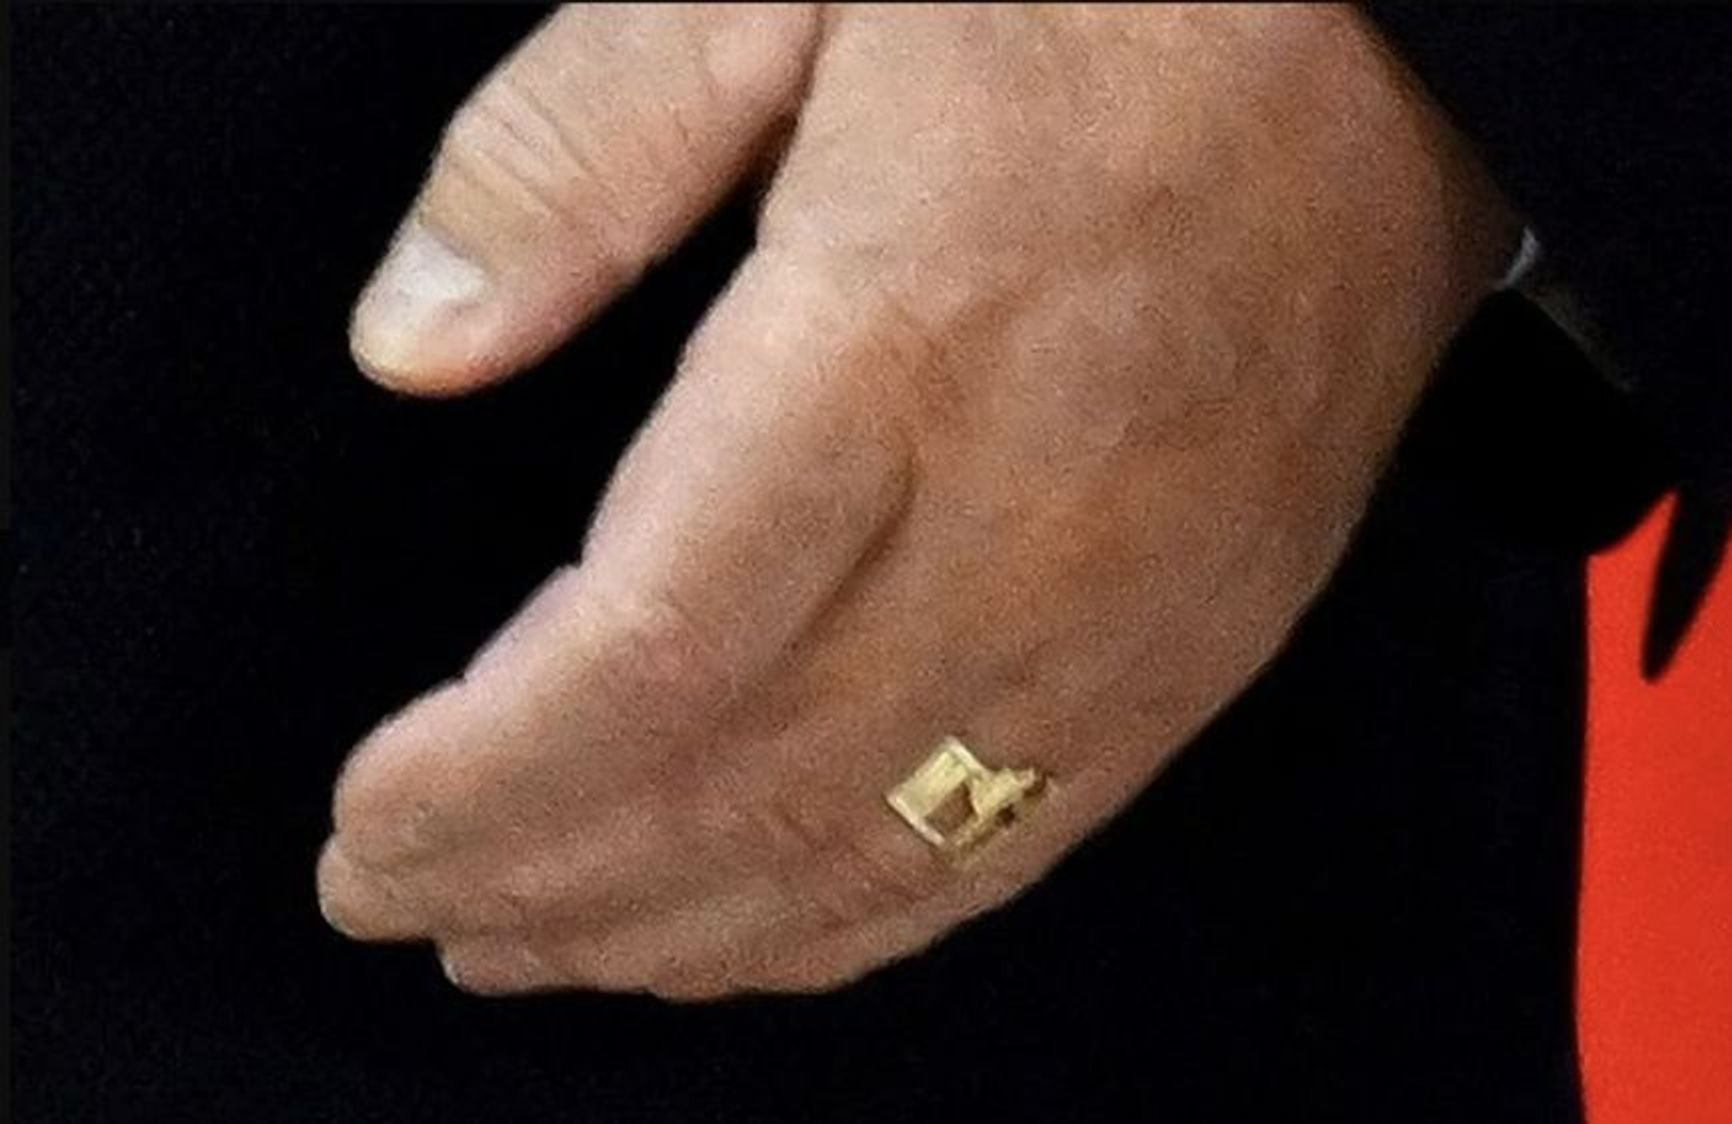 Kommersant published a photo of the ring on Alexander Lukashenko's hand